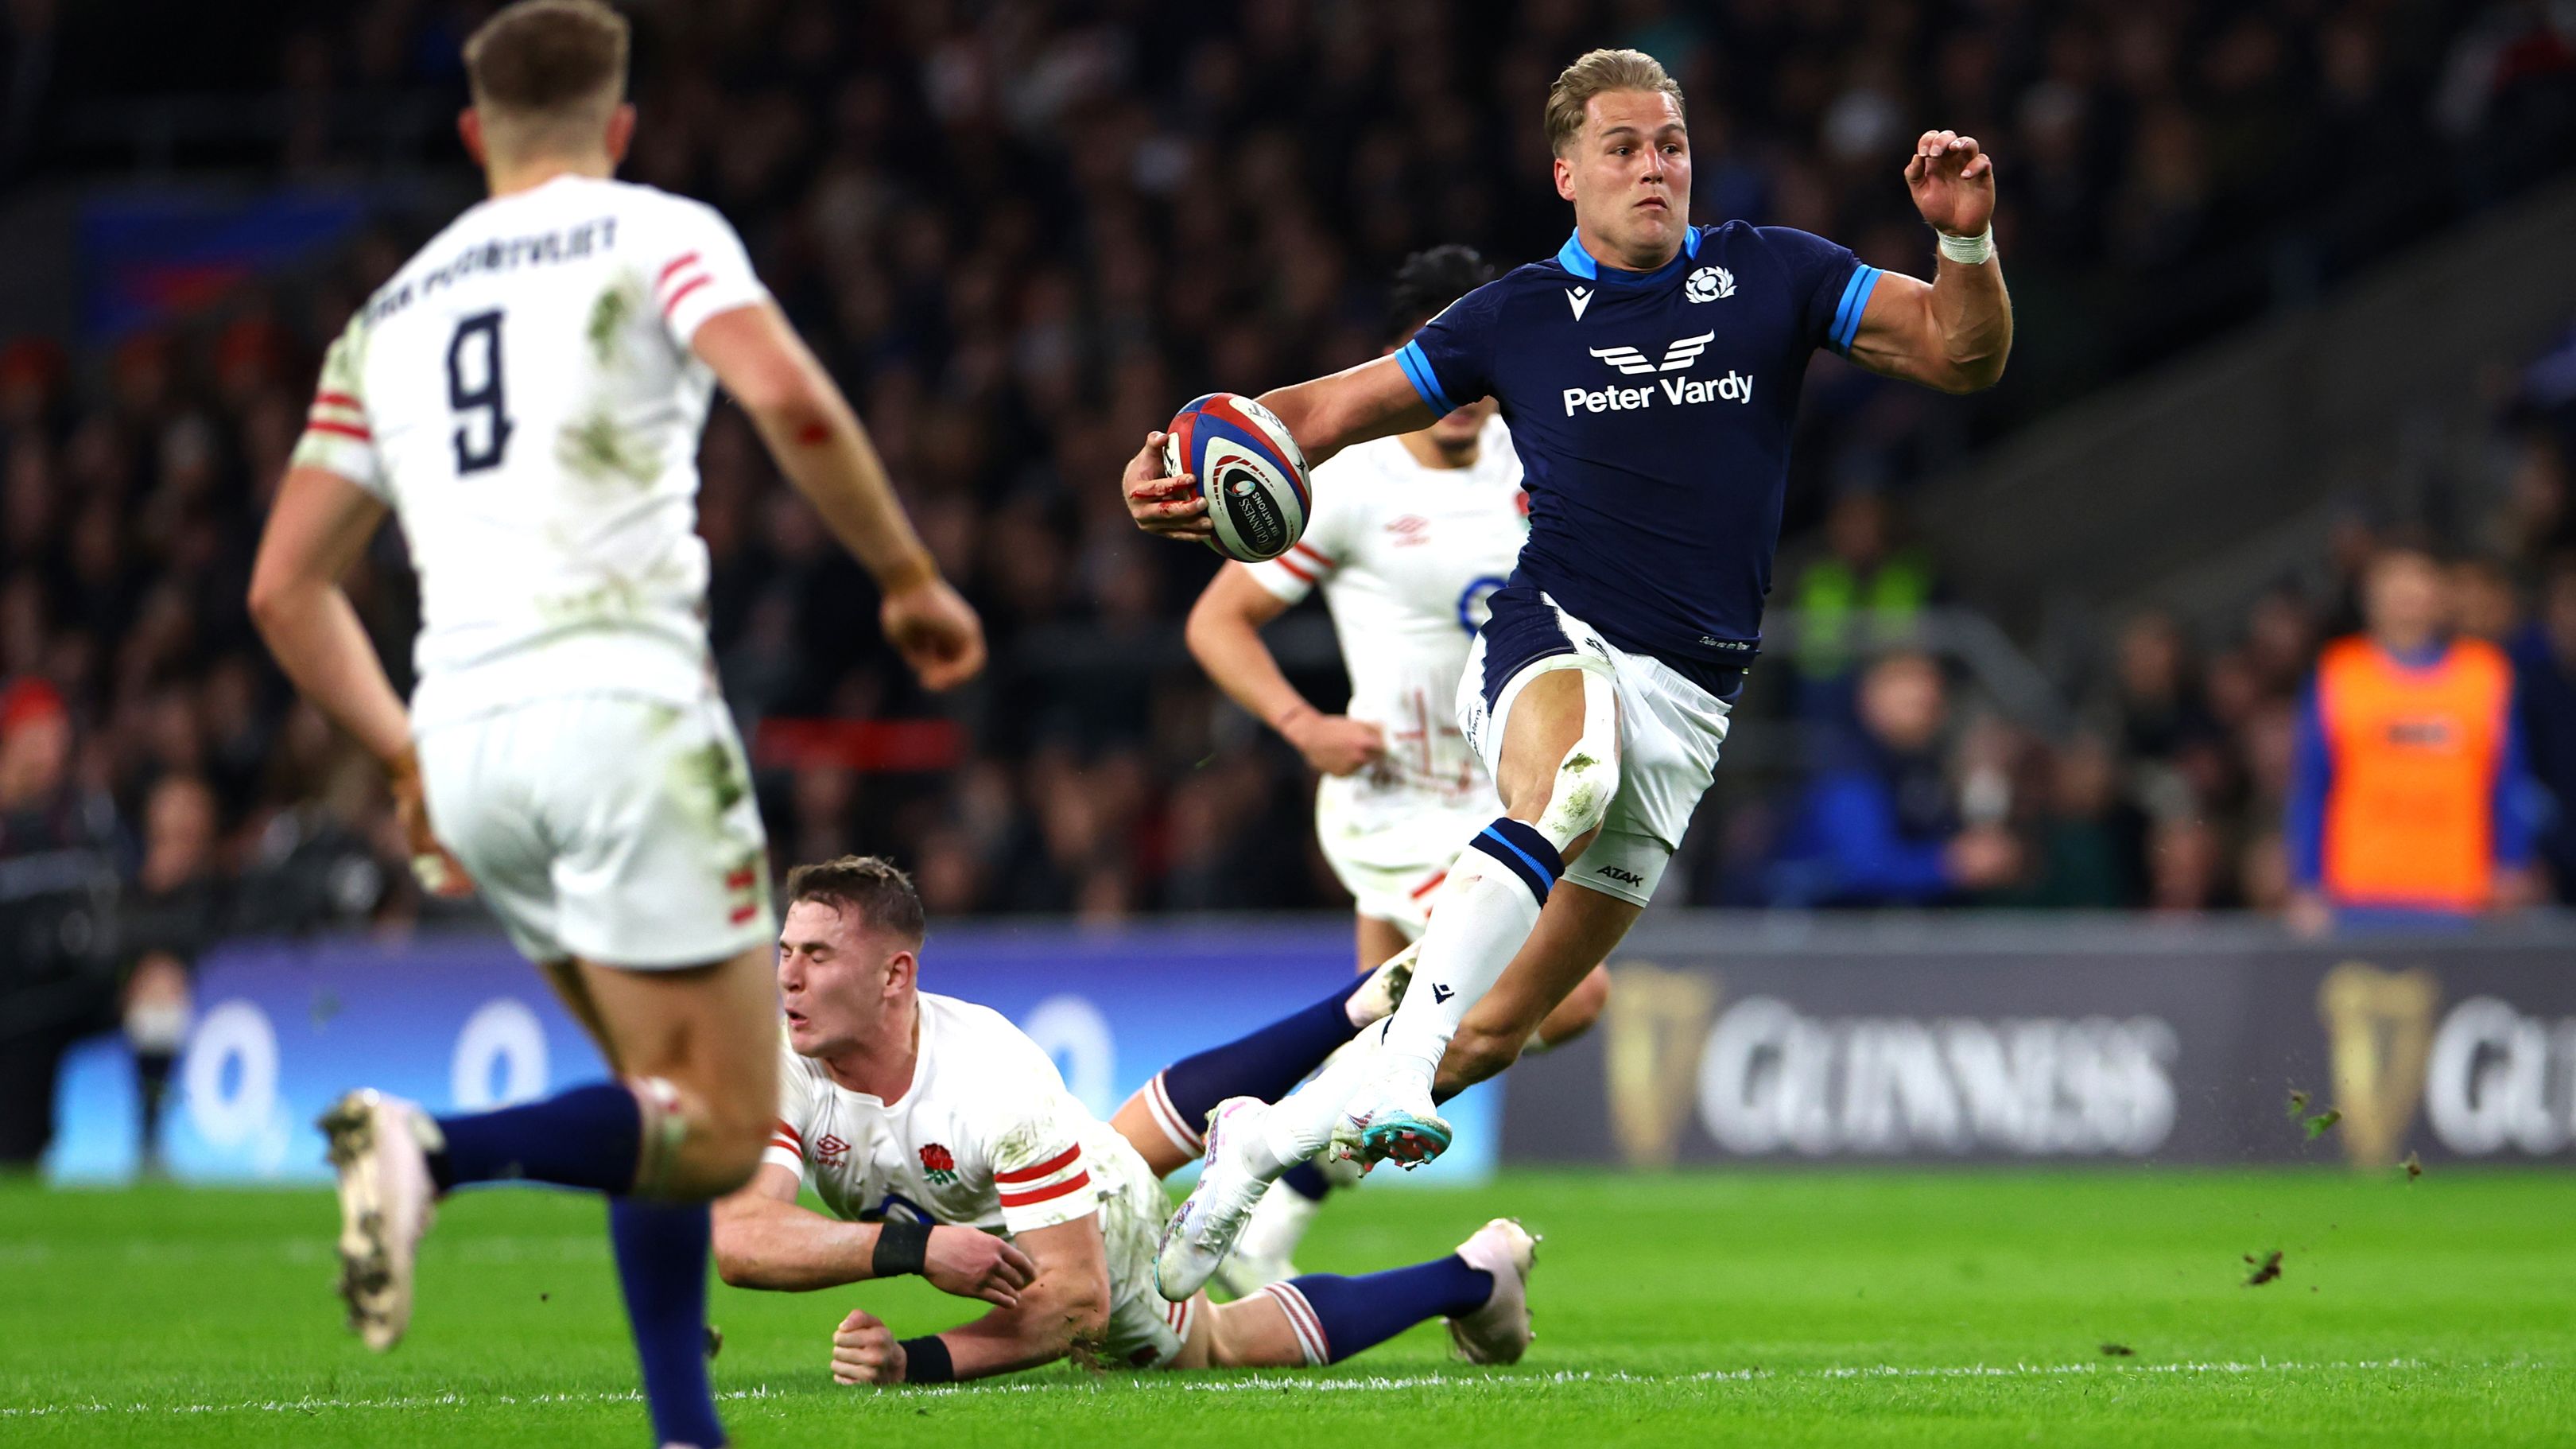 Duhan van der Merwe of Scotland breaks with the ball before touching down.